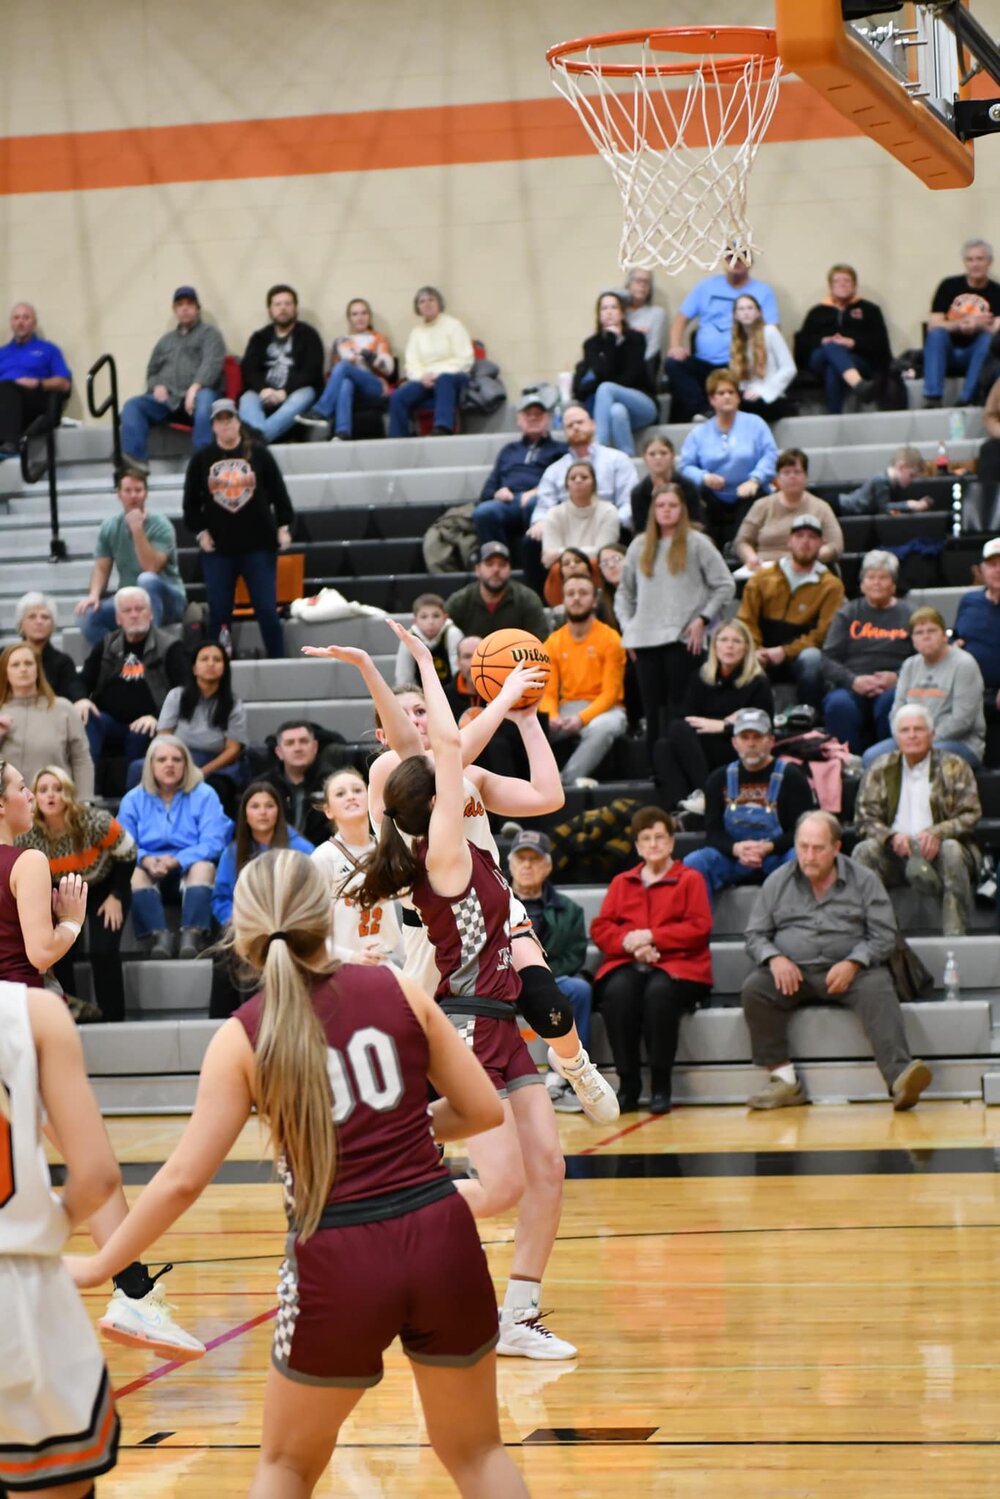 "Super Sophie" Ray (5, with the ball) puts up a buzzer-beating left-handed floater to send the game into overtime. She was second on the team with 15 points in the win over Eagleville on Tuesday night.